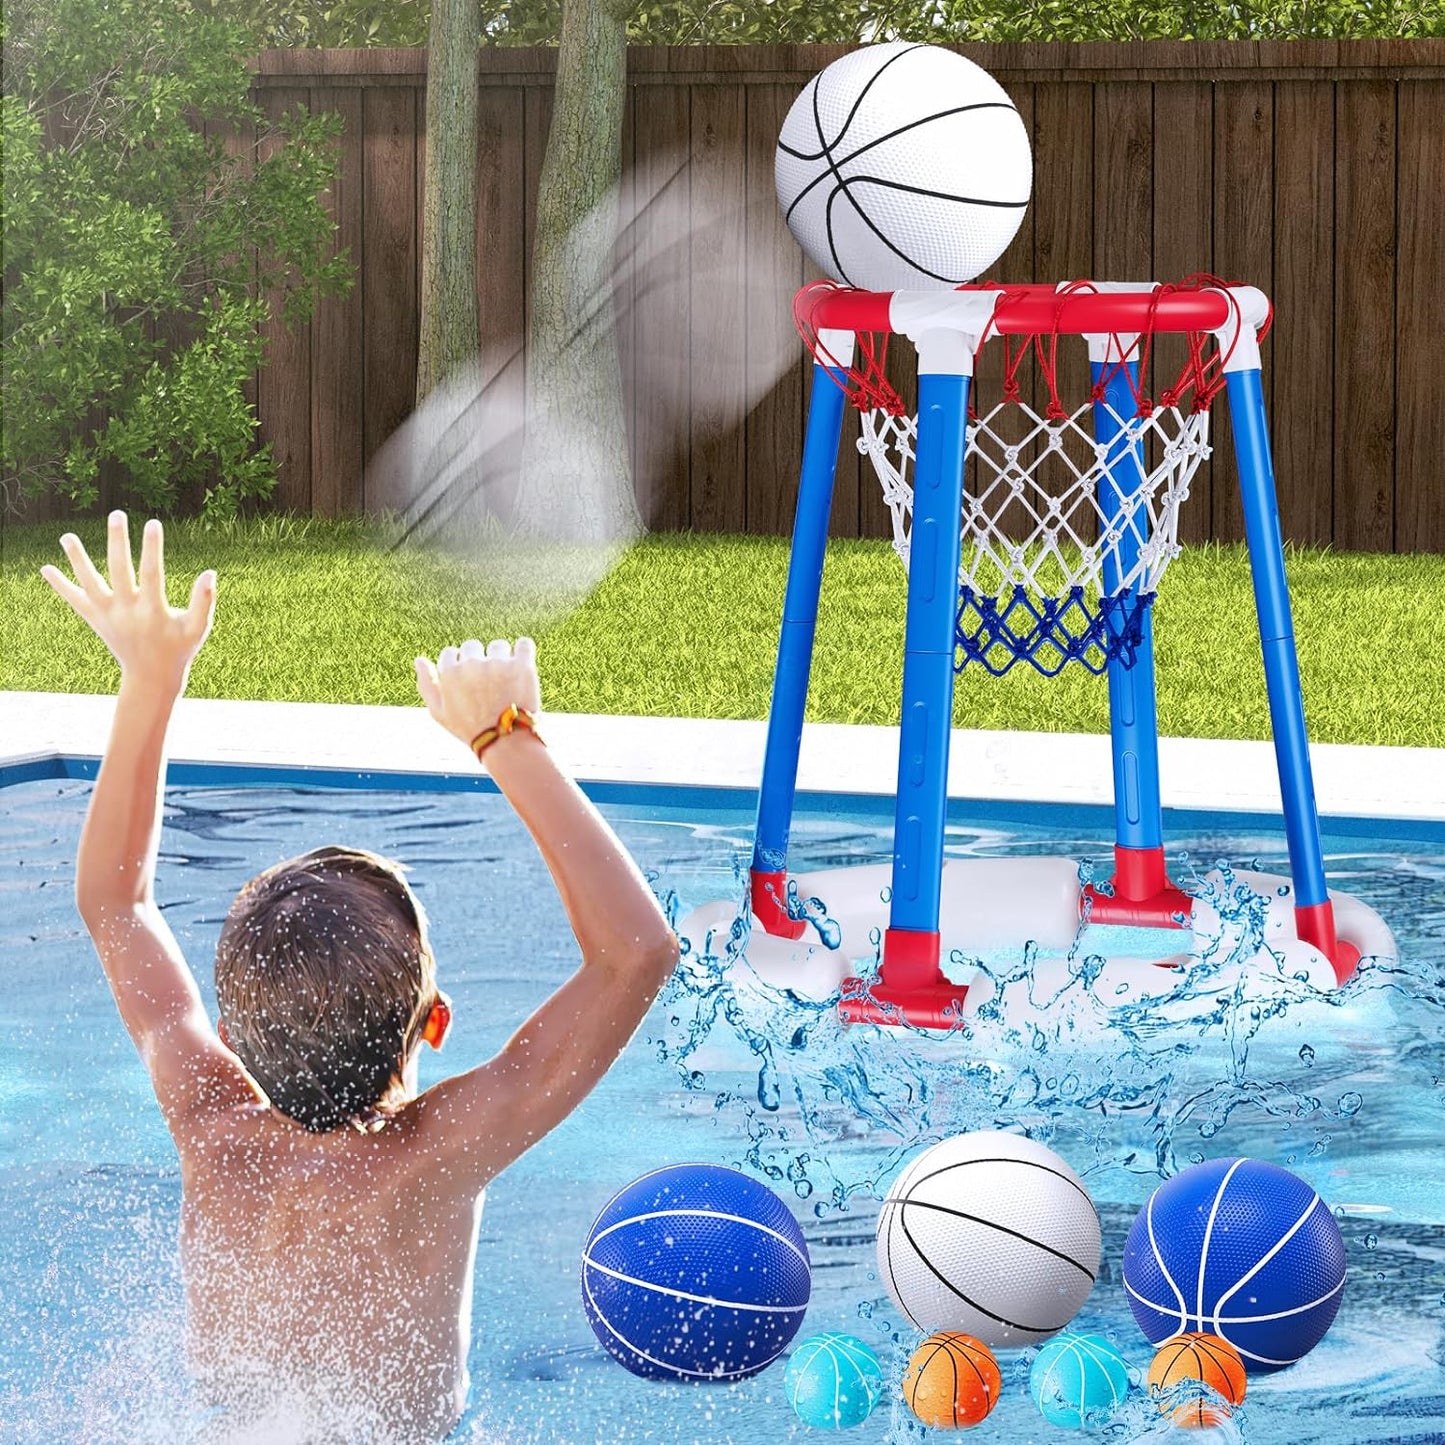 Pool Basketball Hoop Poolside with Backboard, Floating Pool Toys with 4 Basketballs/4 Water Balloons/Pump, Swimming Pool Games for Kids & Adults Indoor Outdoor Play, Red